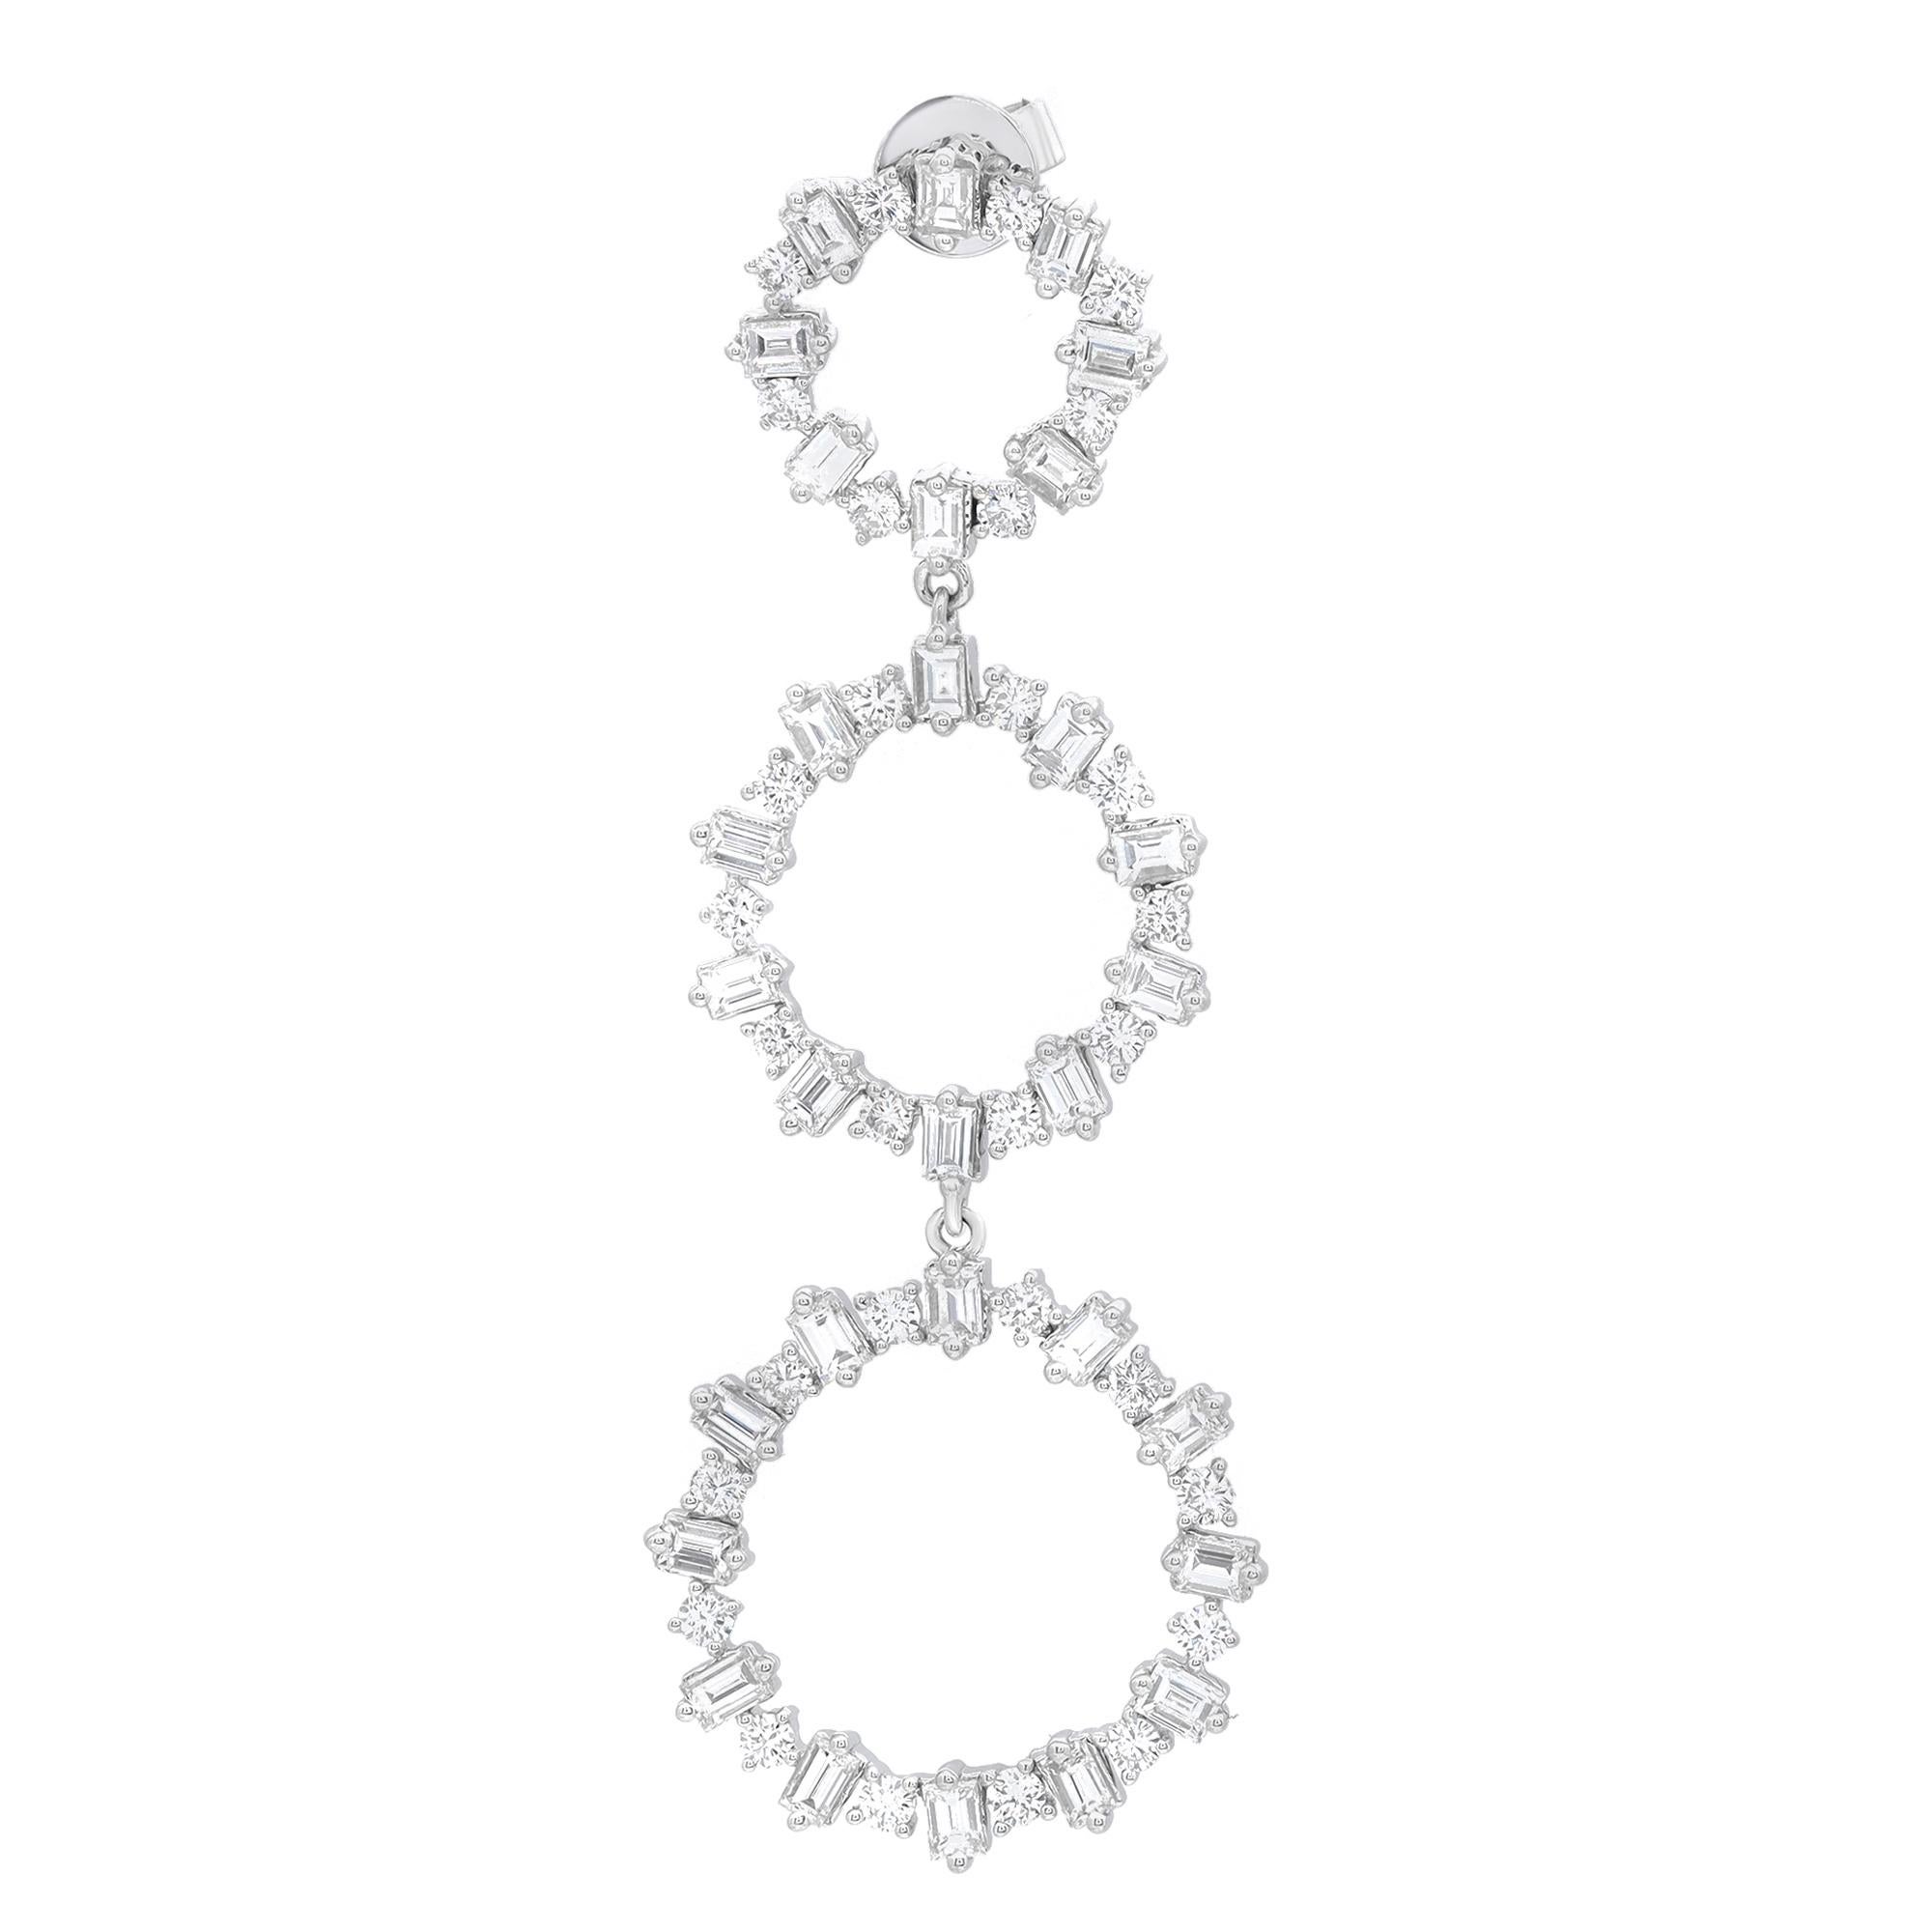 These exemplary dangle earrings mounted in 18k white gold add a touch of elegance and sophistication to any outfit. Featuring, prong set baguette and round cut diamonds encrusted in three graduating circles. Total diamond weight: 4.45 carats.